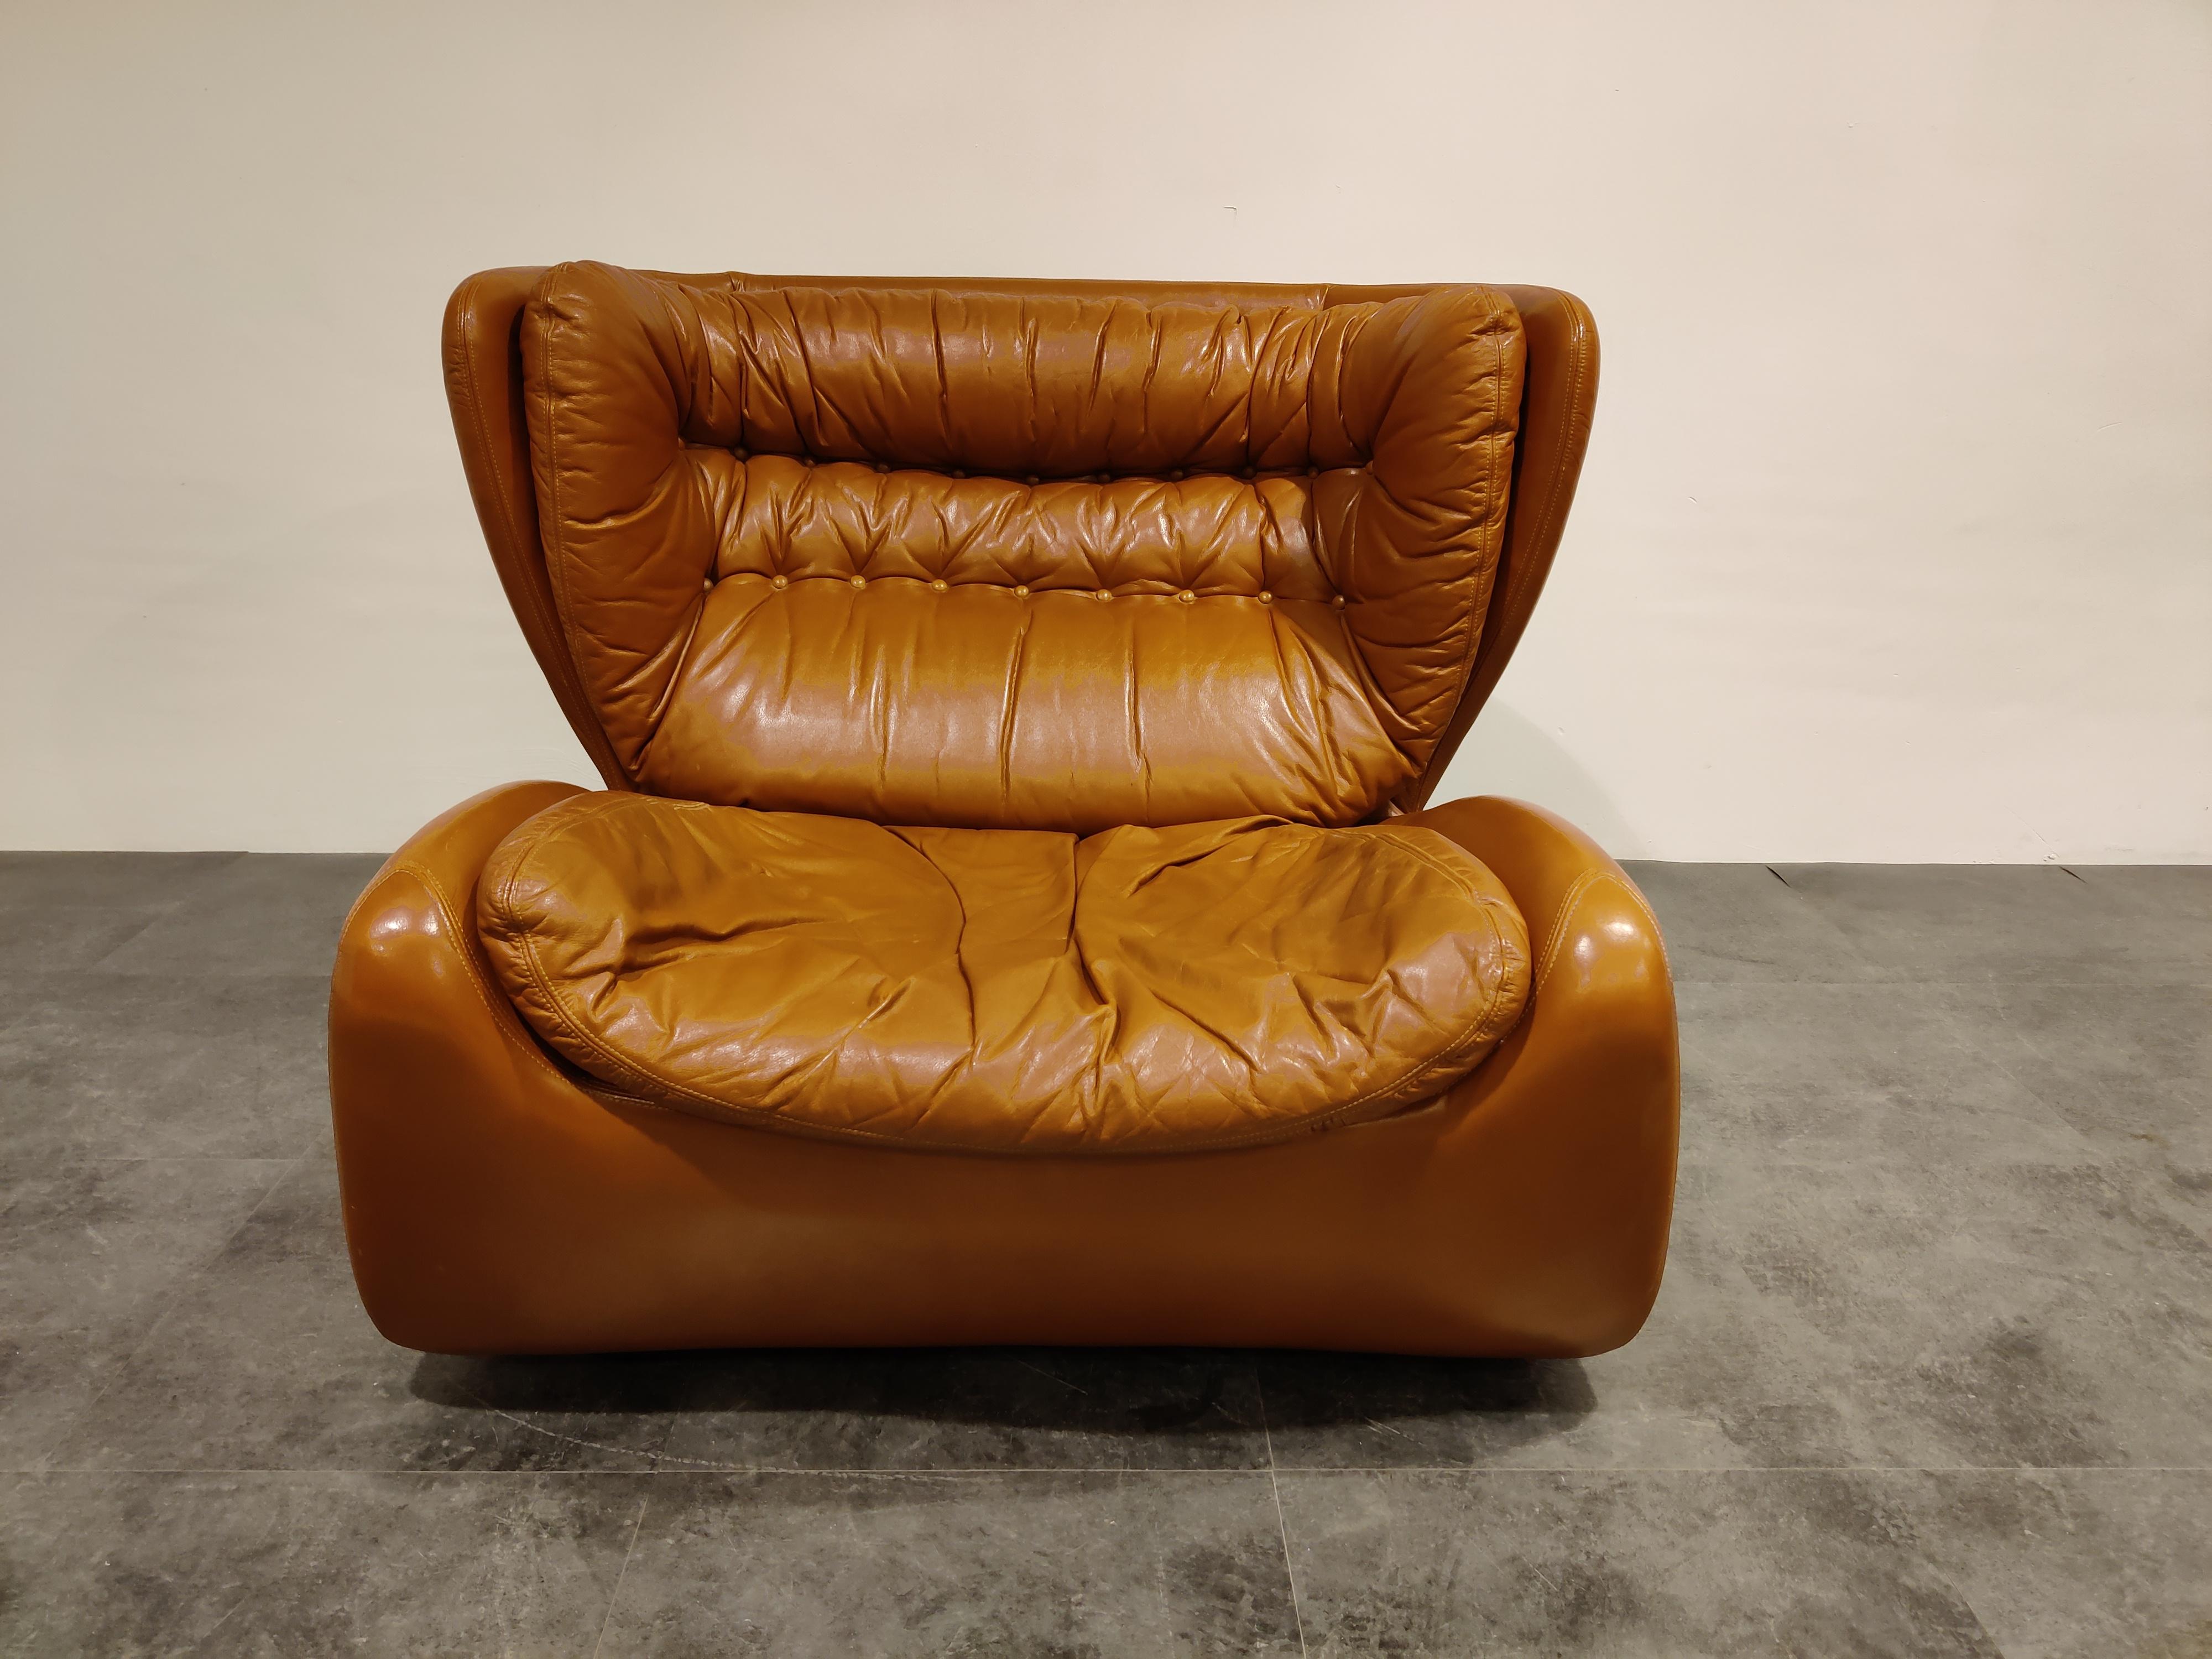 Exquisite vintage brown leather lounge chair designed by Hein Waldmann & A. Schmidt for Durlet in the 1970s.

This beautiful piece doesn’t only look good but sits fantastically thanks to its seat angle and the high backrest.

We think it's a